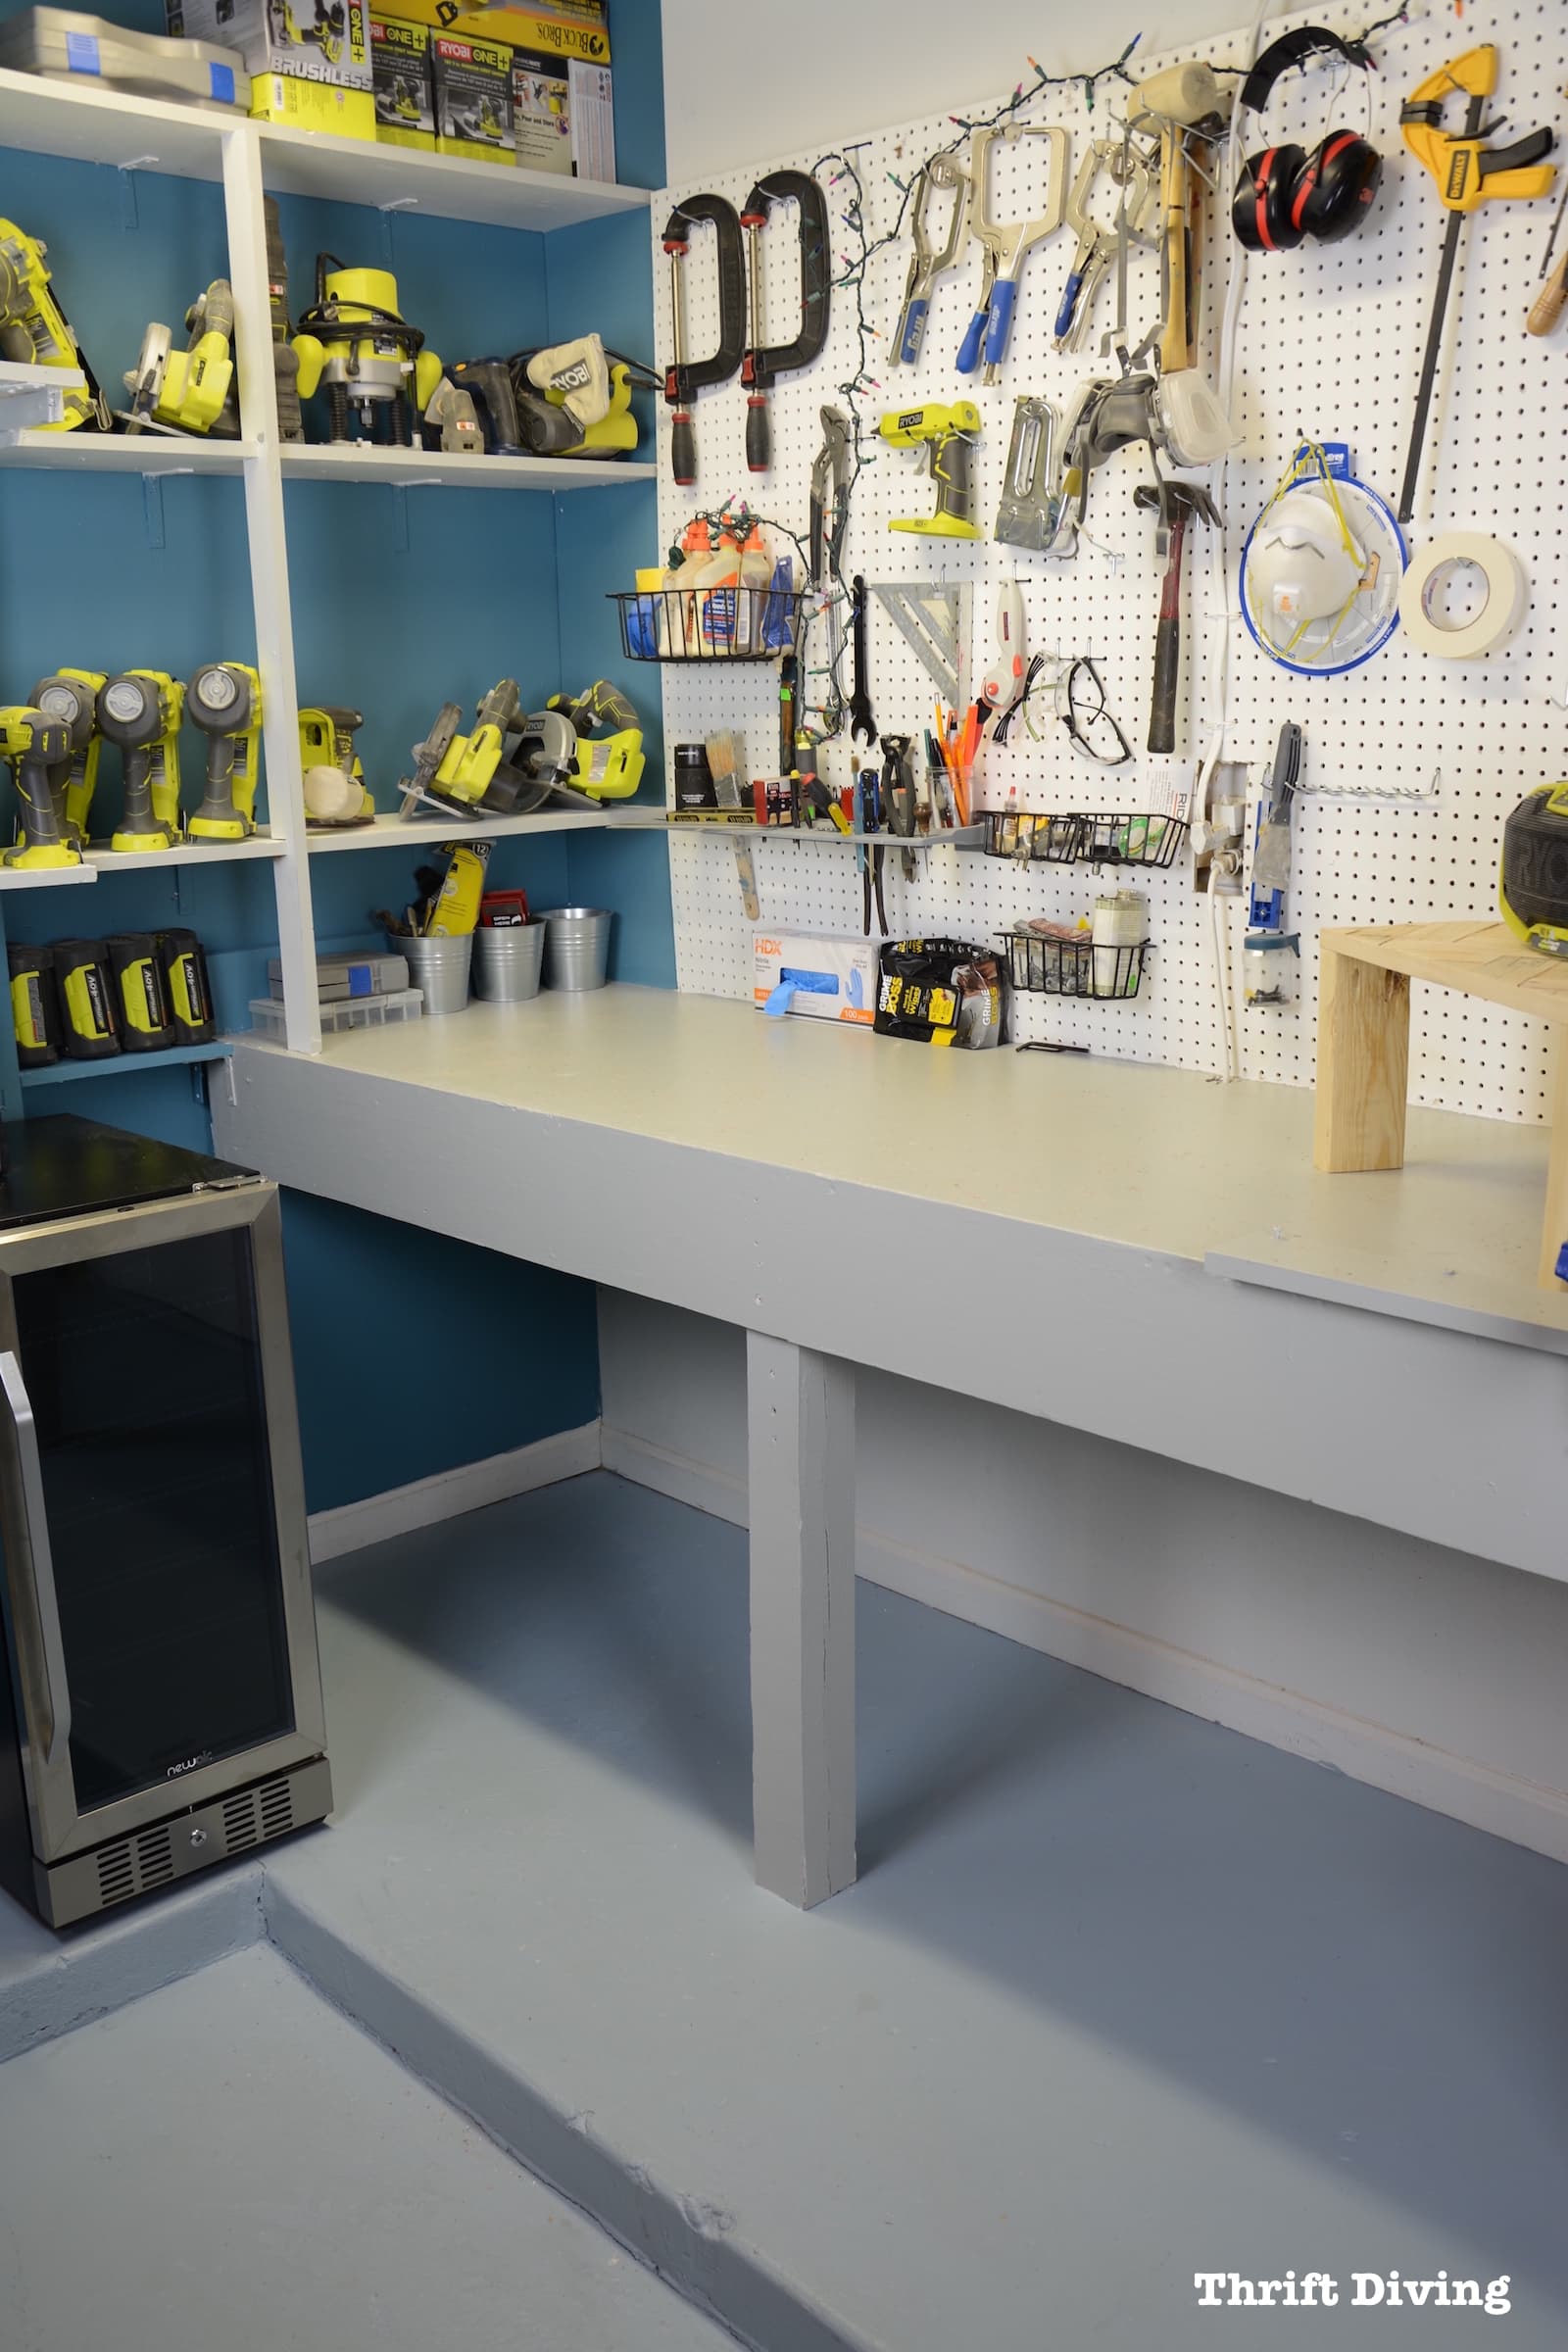 Workbench paint makeover with Beyond Paint - How to Paint a Workbench Using Beyond Paint - Gray workbench, teal accent wall, white pegboard. - Thrift Diving